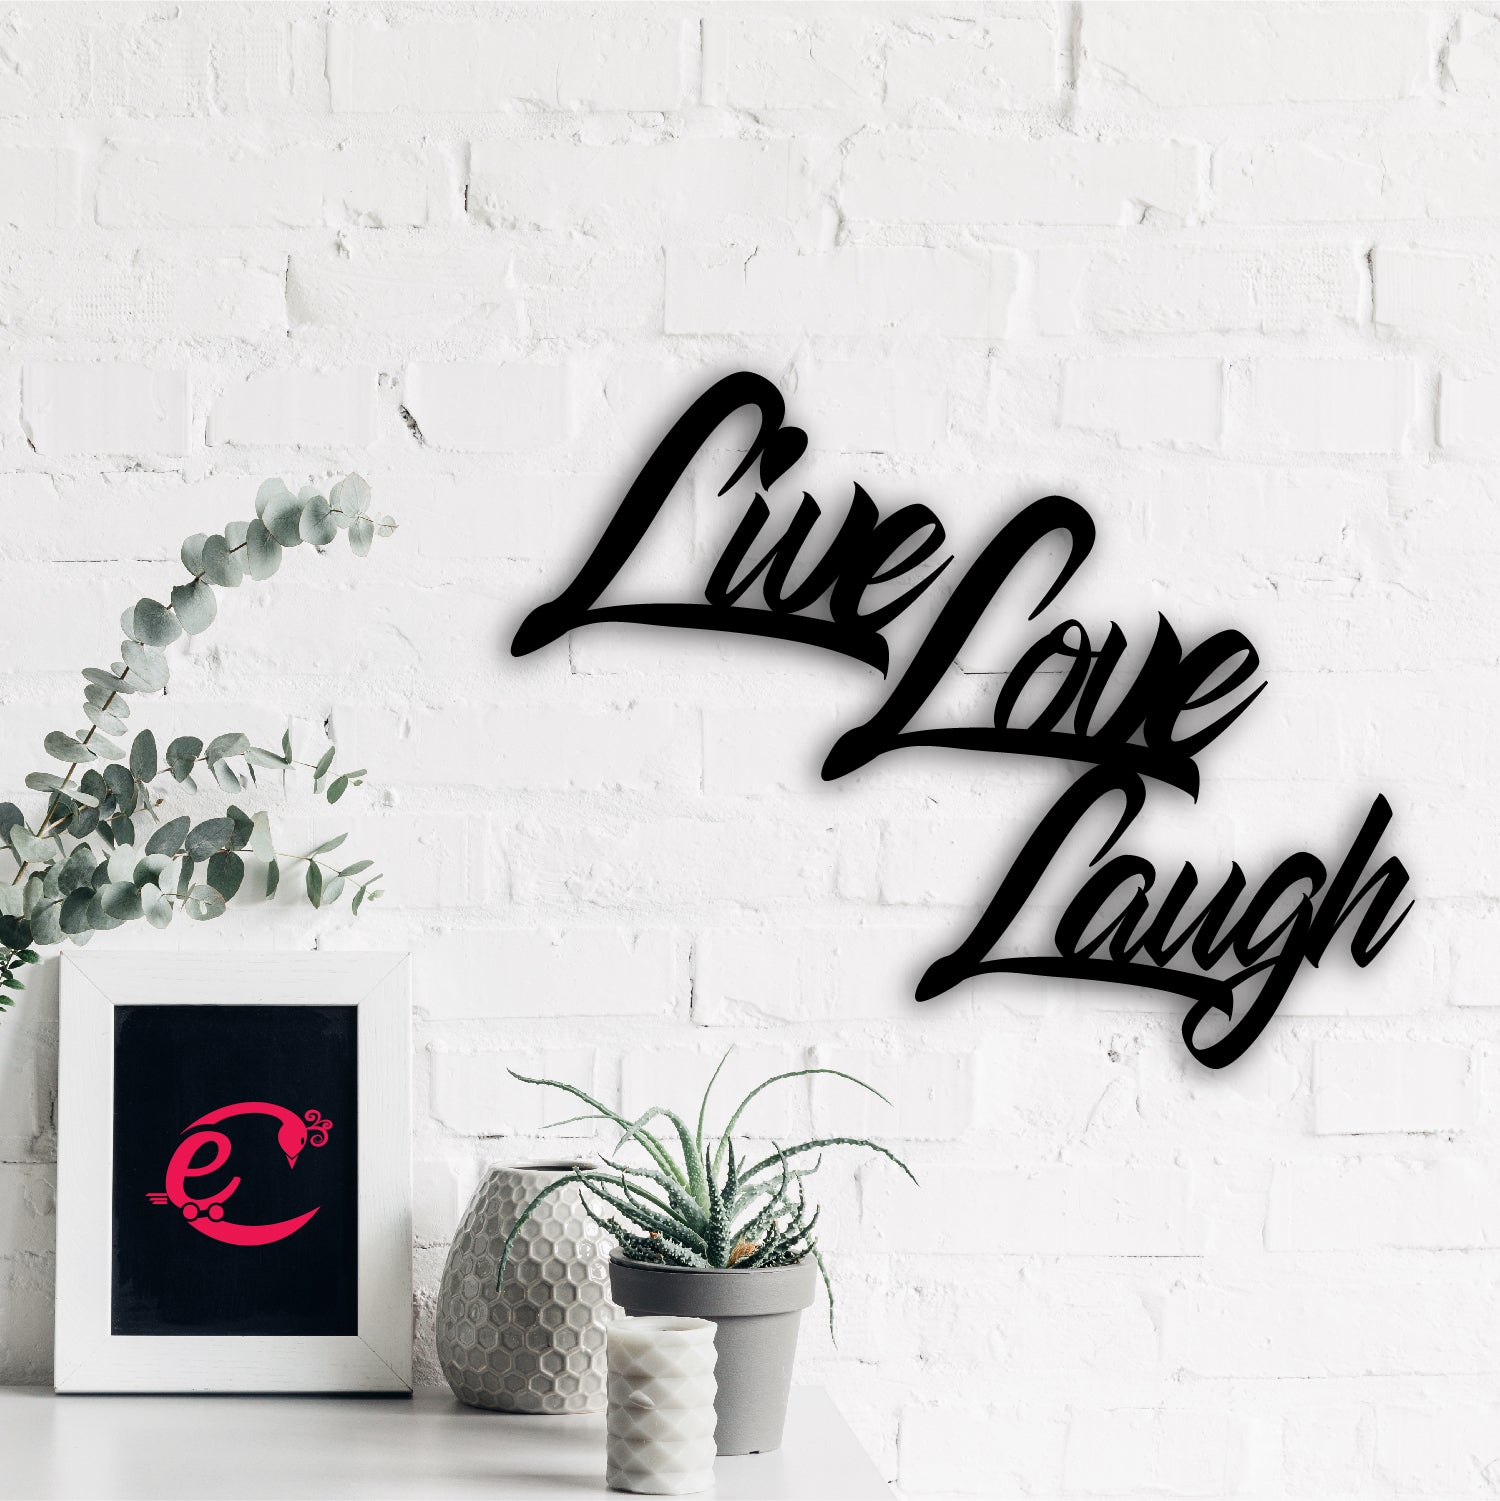 "Live Love Laugh" Black MDF Engineered Wooden Wall Art/Hanging Cutout for Home Decor 3